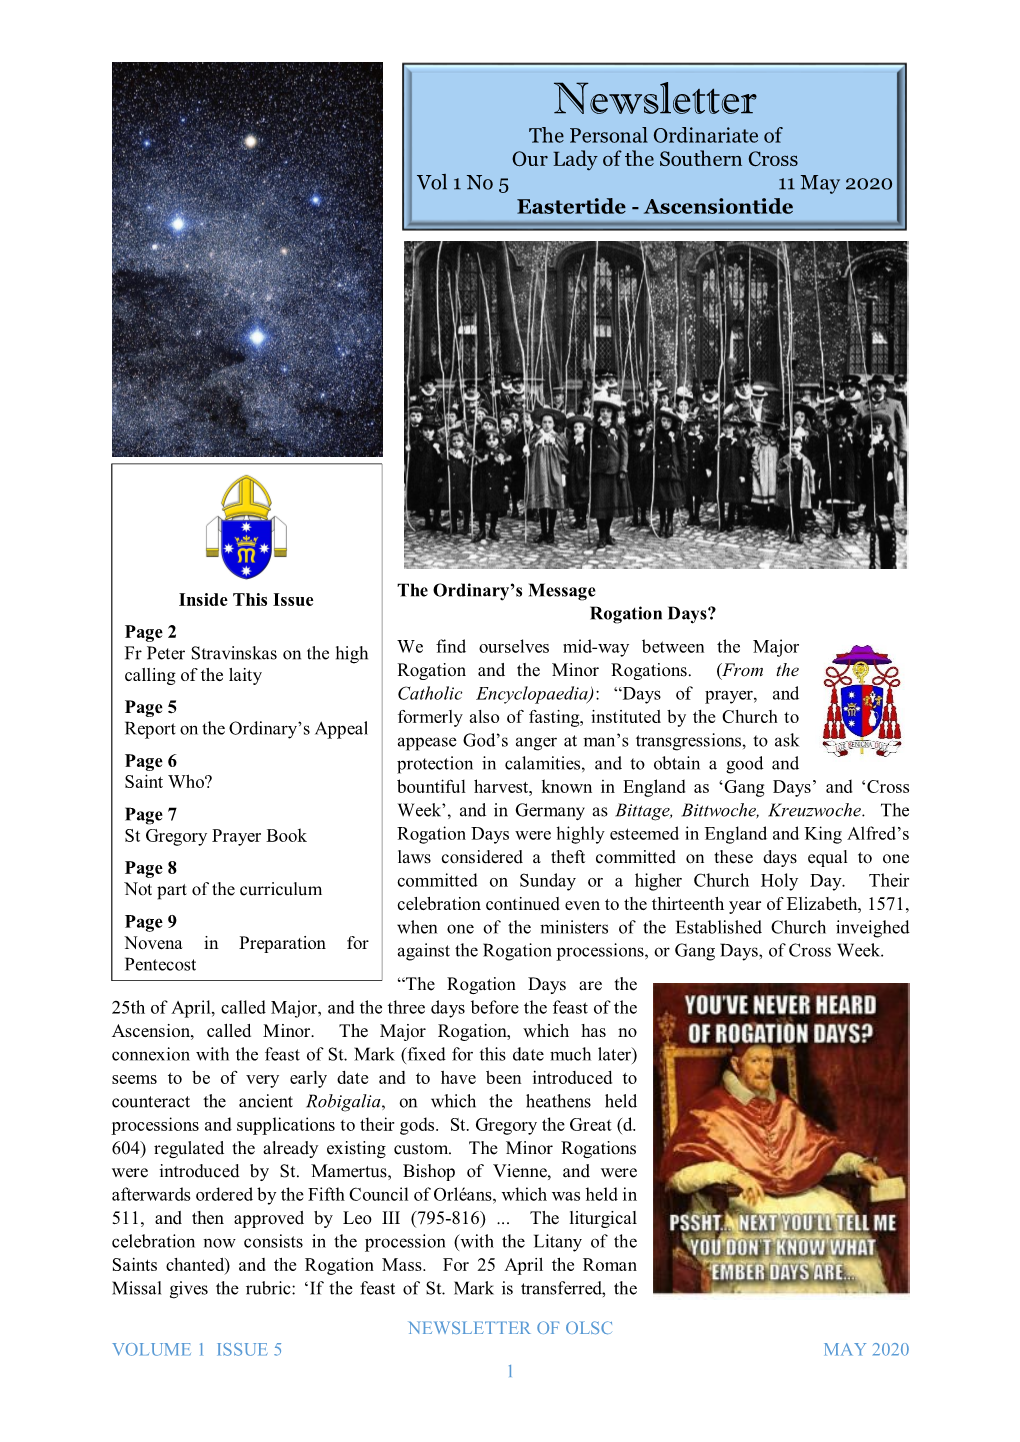 Newsletter the Personal Ordinariate of Our Lady of the Southern Cross Vol 1 No 5 11 May 2020 Eastertide - Ascensiontide